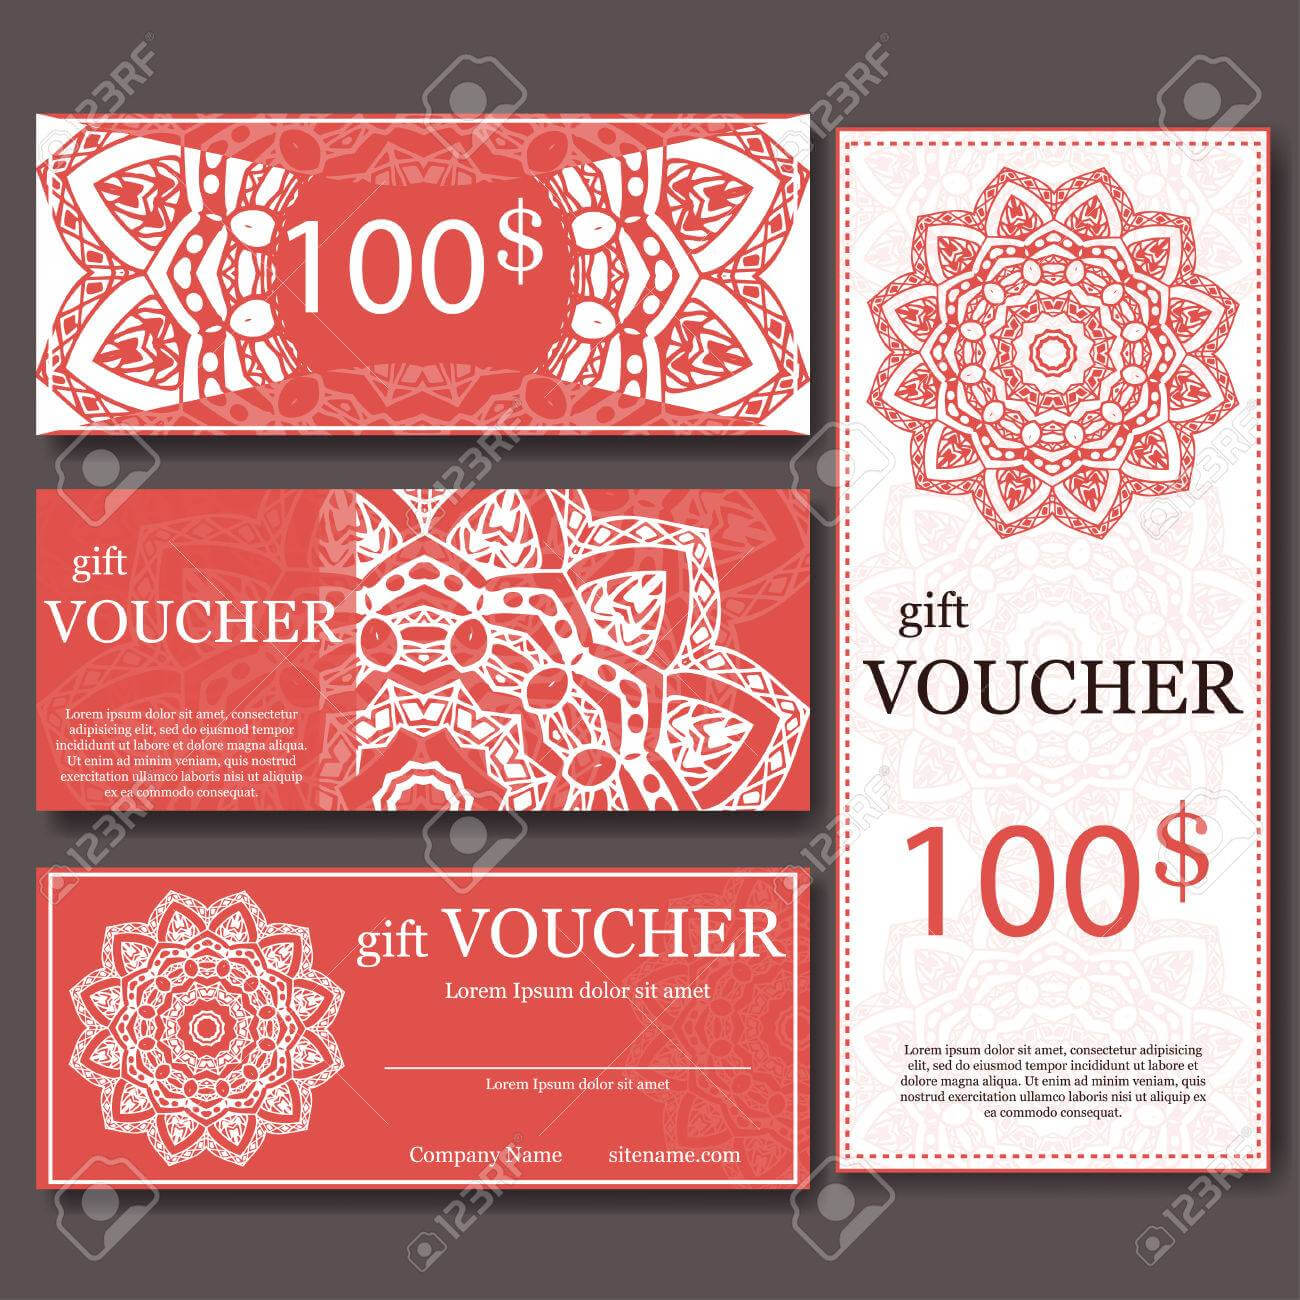 Gift Voucher Template With Mandala. Design Certificate For Sport.. In Yoga Gift Certificate Template Free